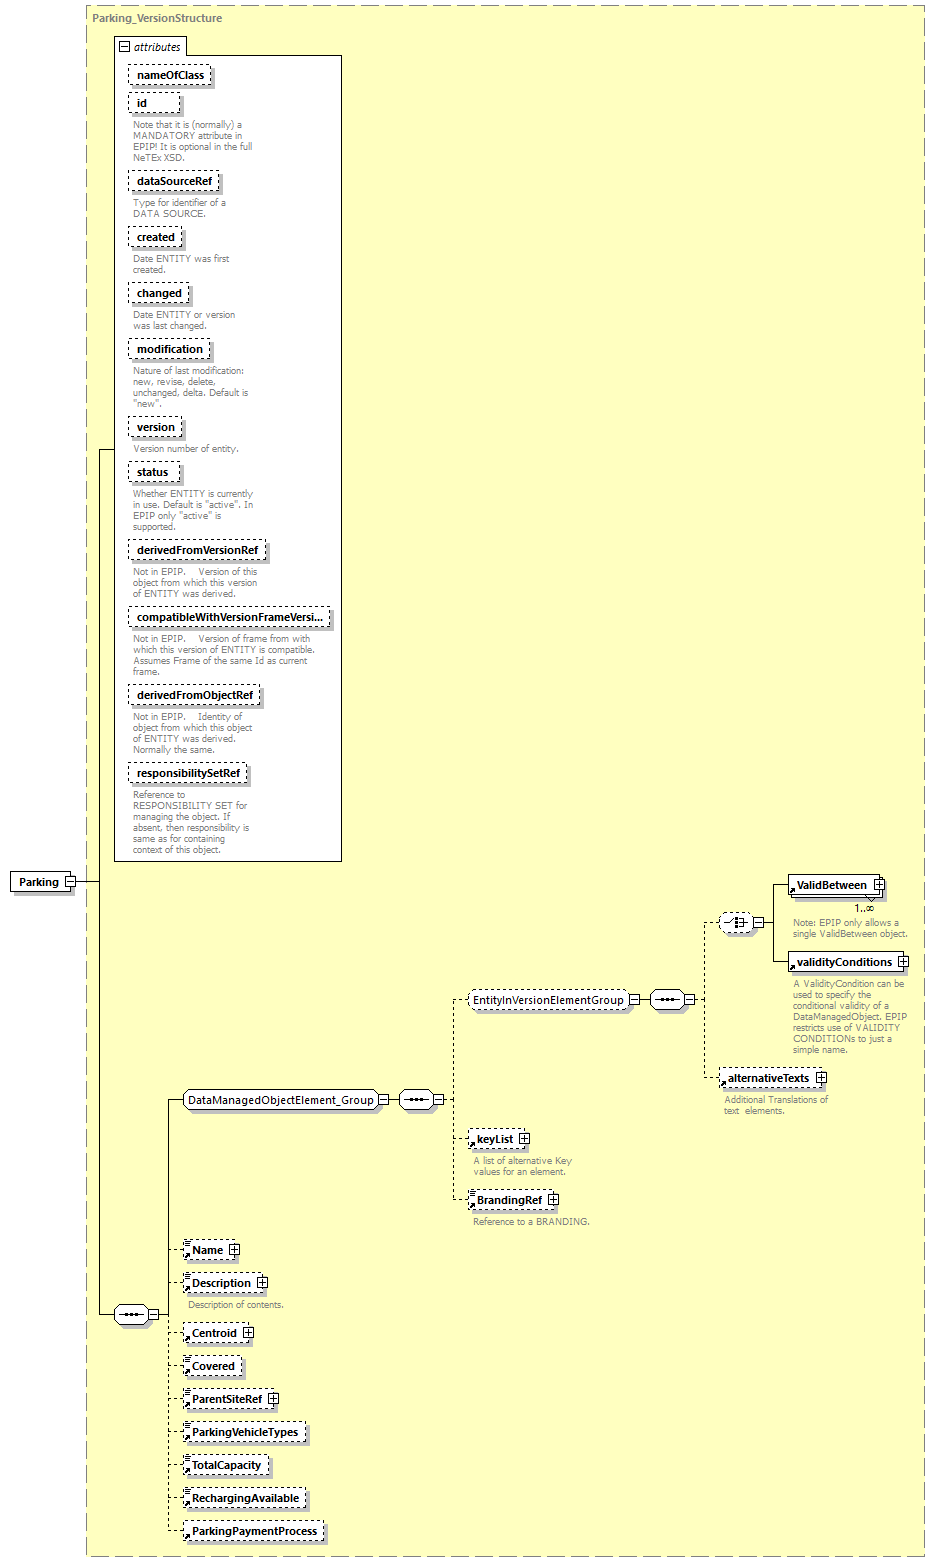 reduced_diagrams/reduced_p307.png